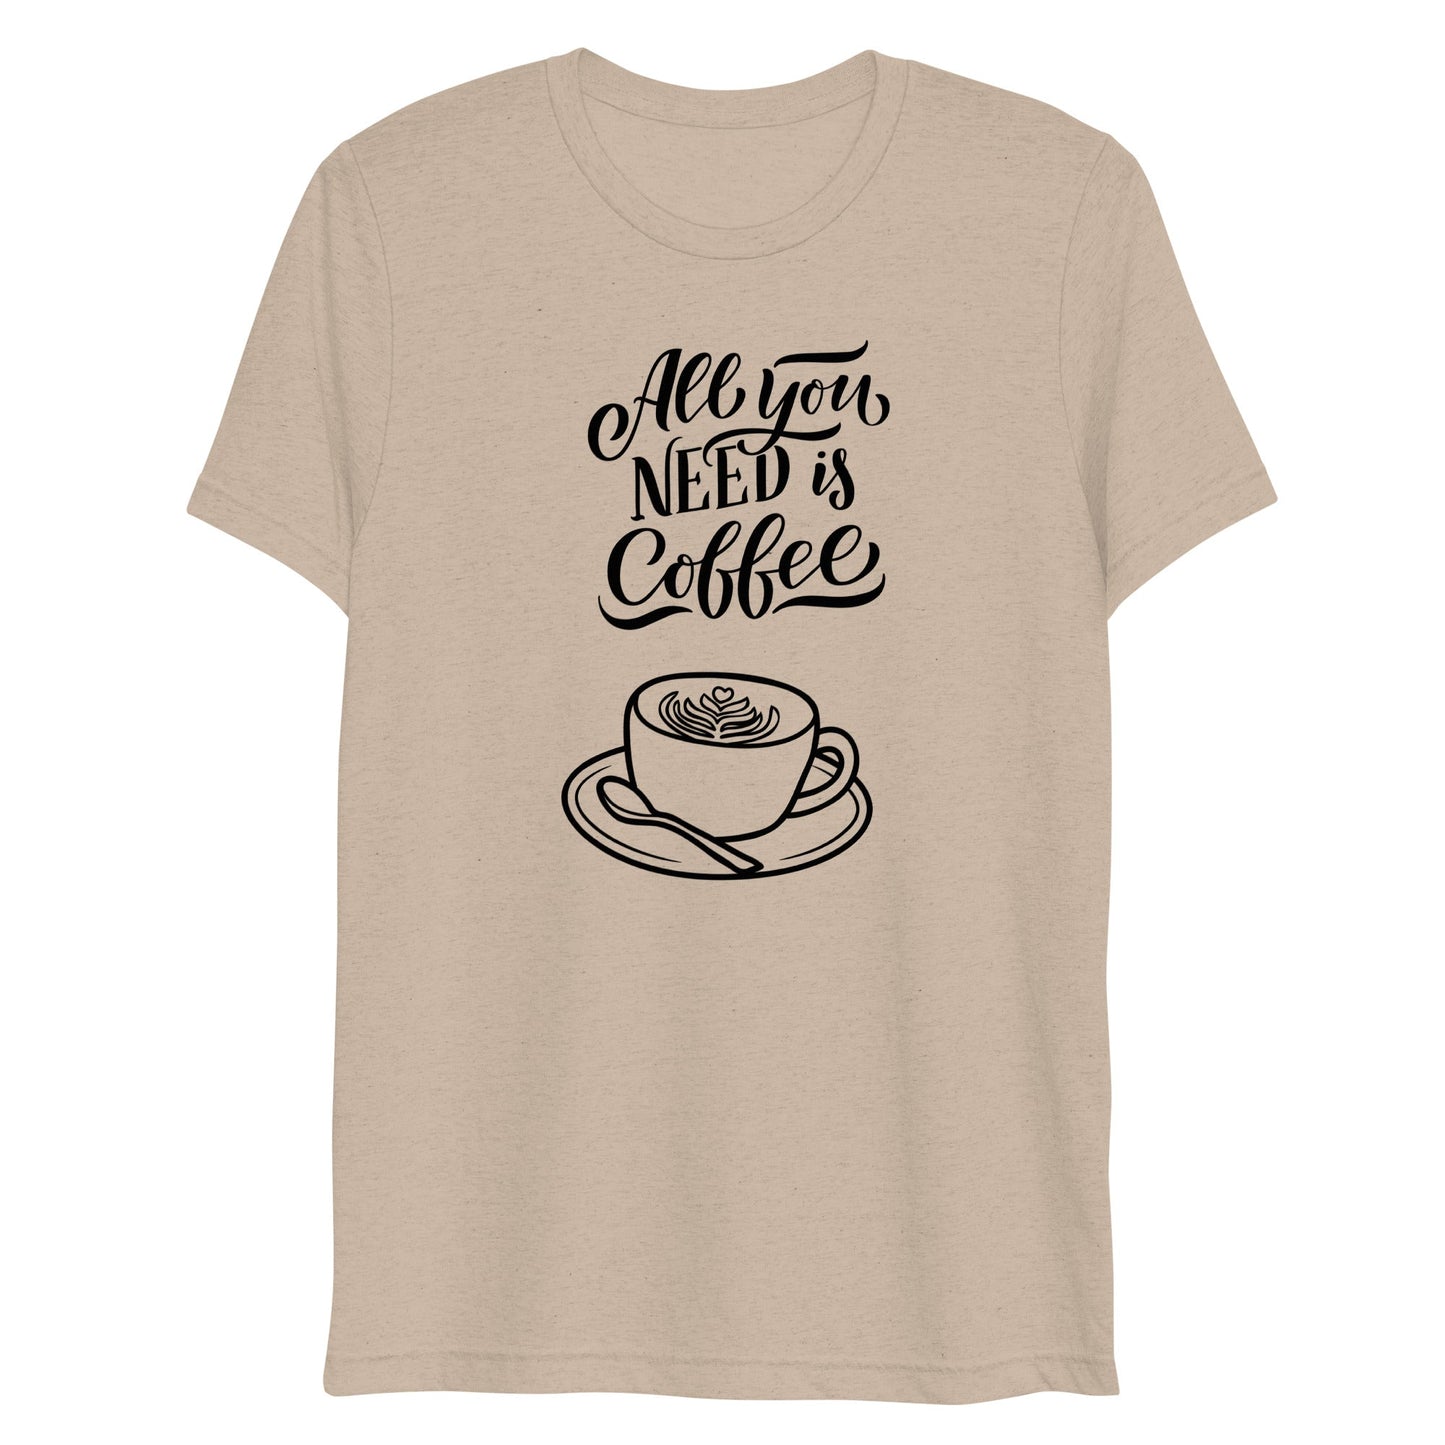 All You Need Is Coffee T-Shirt - ShopJeanPhotography.com